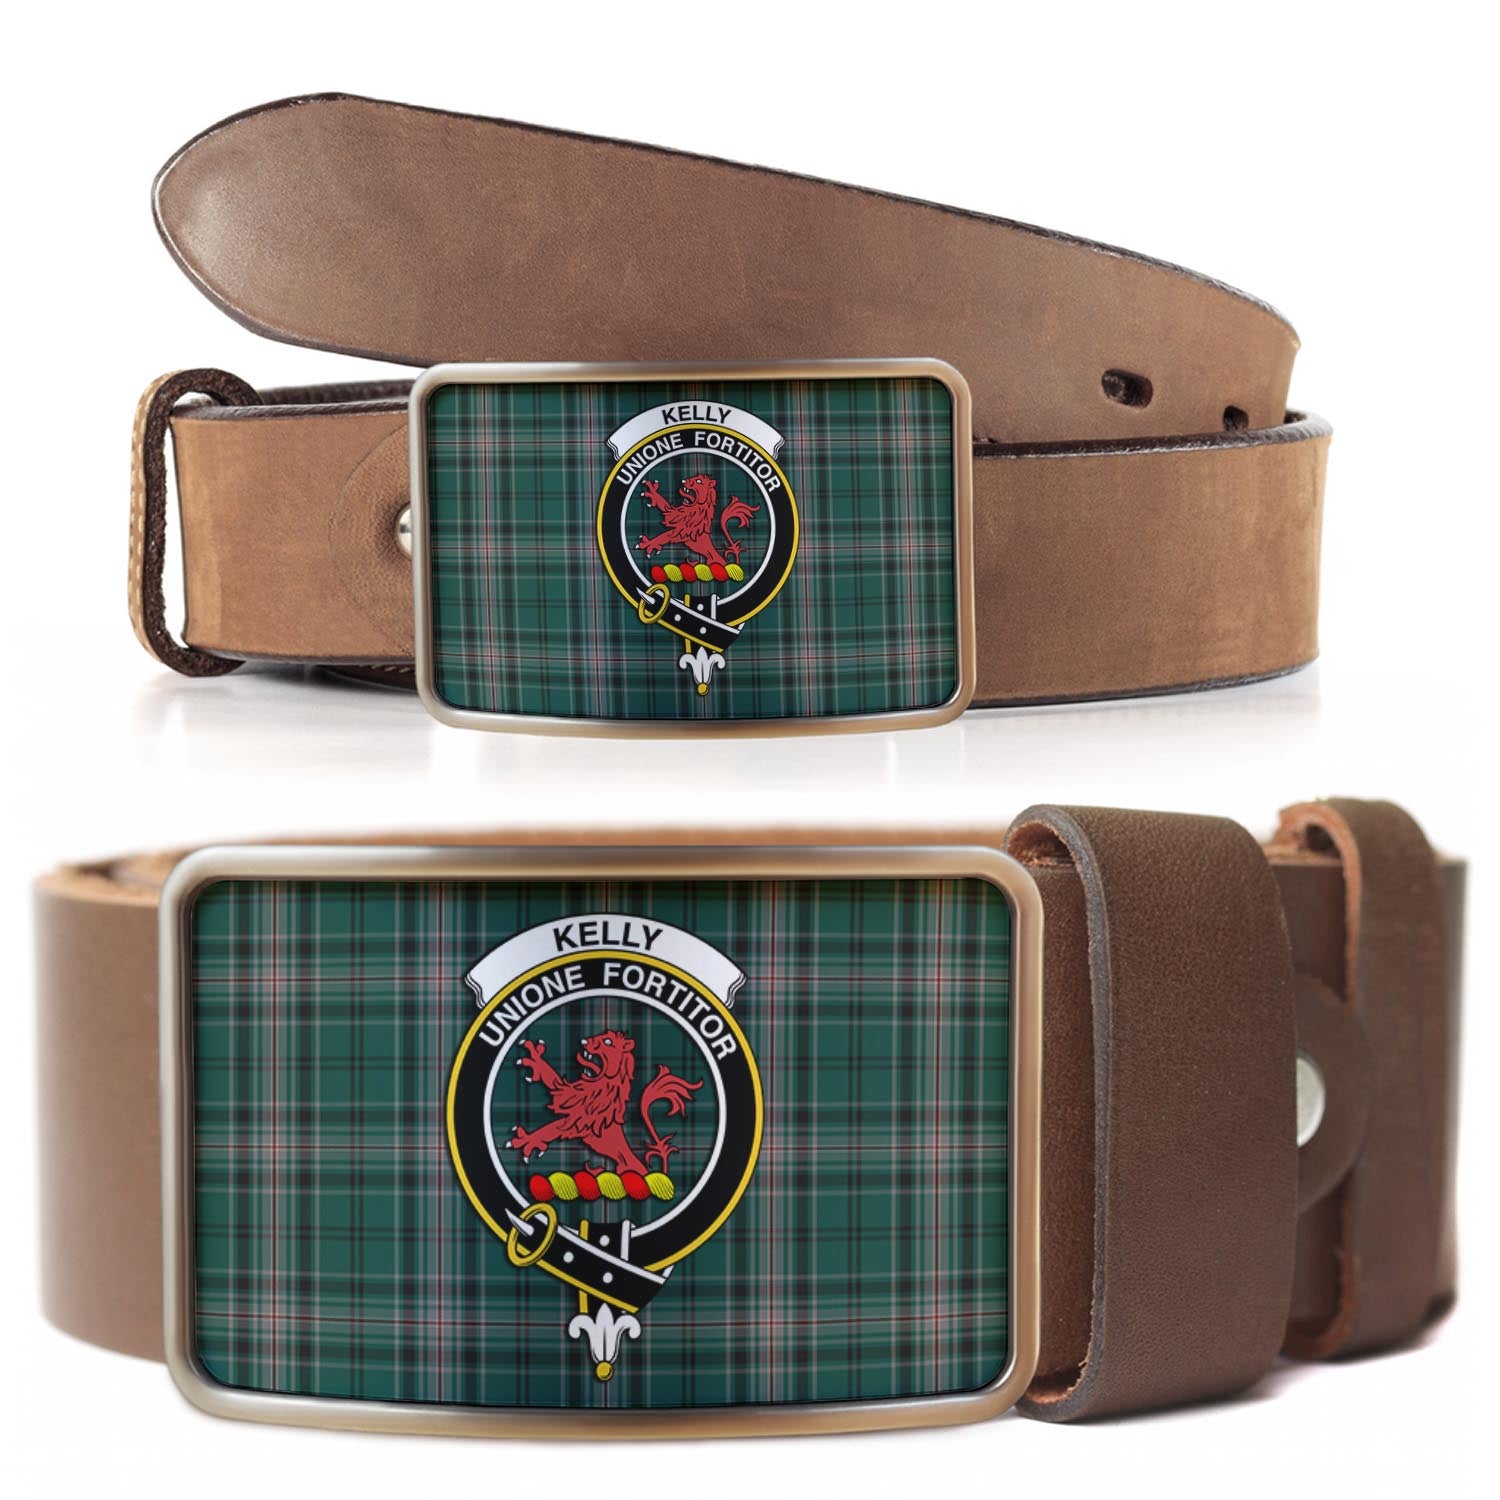 Kelly of Sleat Hunting Tartan Belt Buckles with Family Crest - Tartanvibesclothing